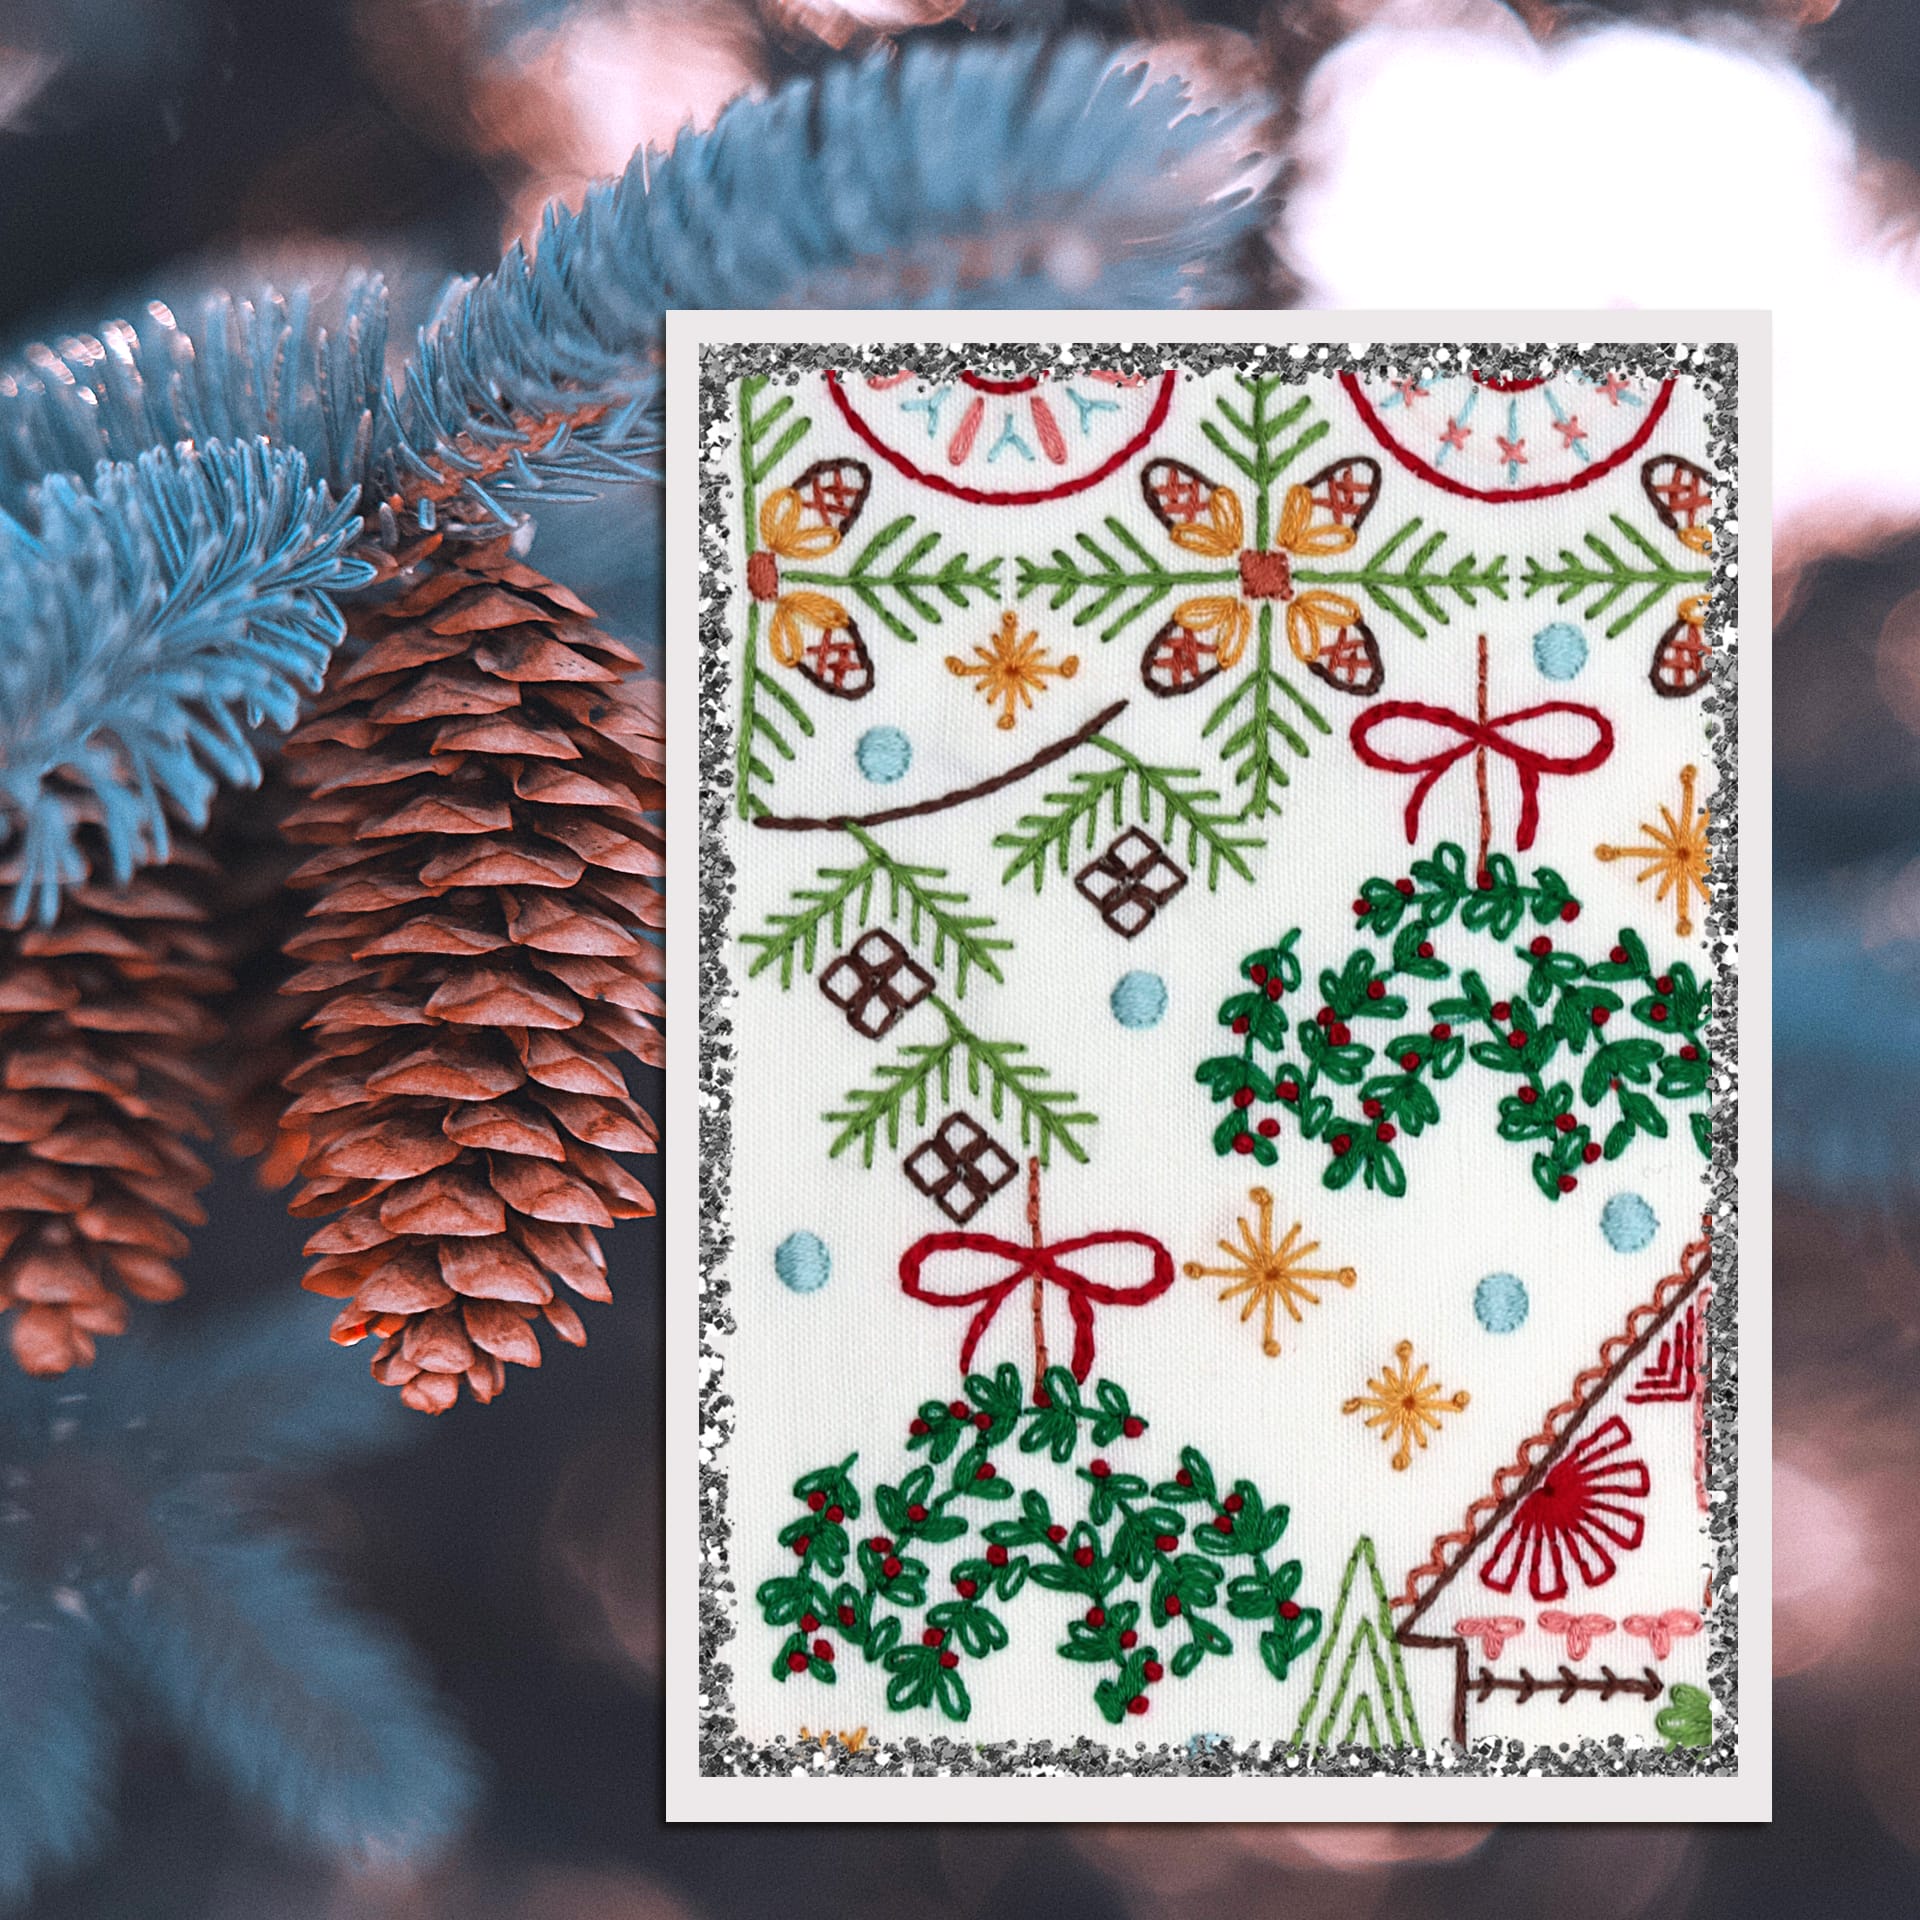 embroidered holiday scene inspired by pinecone wreaths and garlands